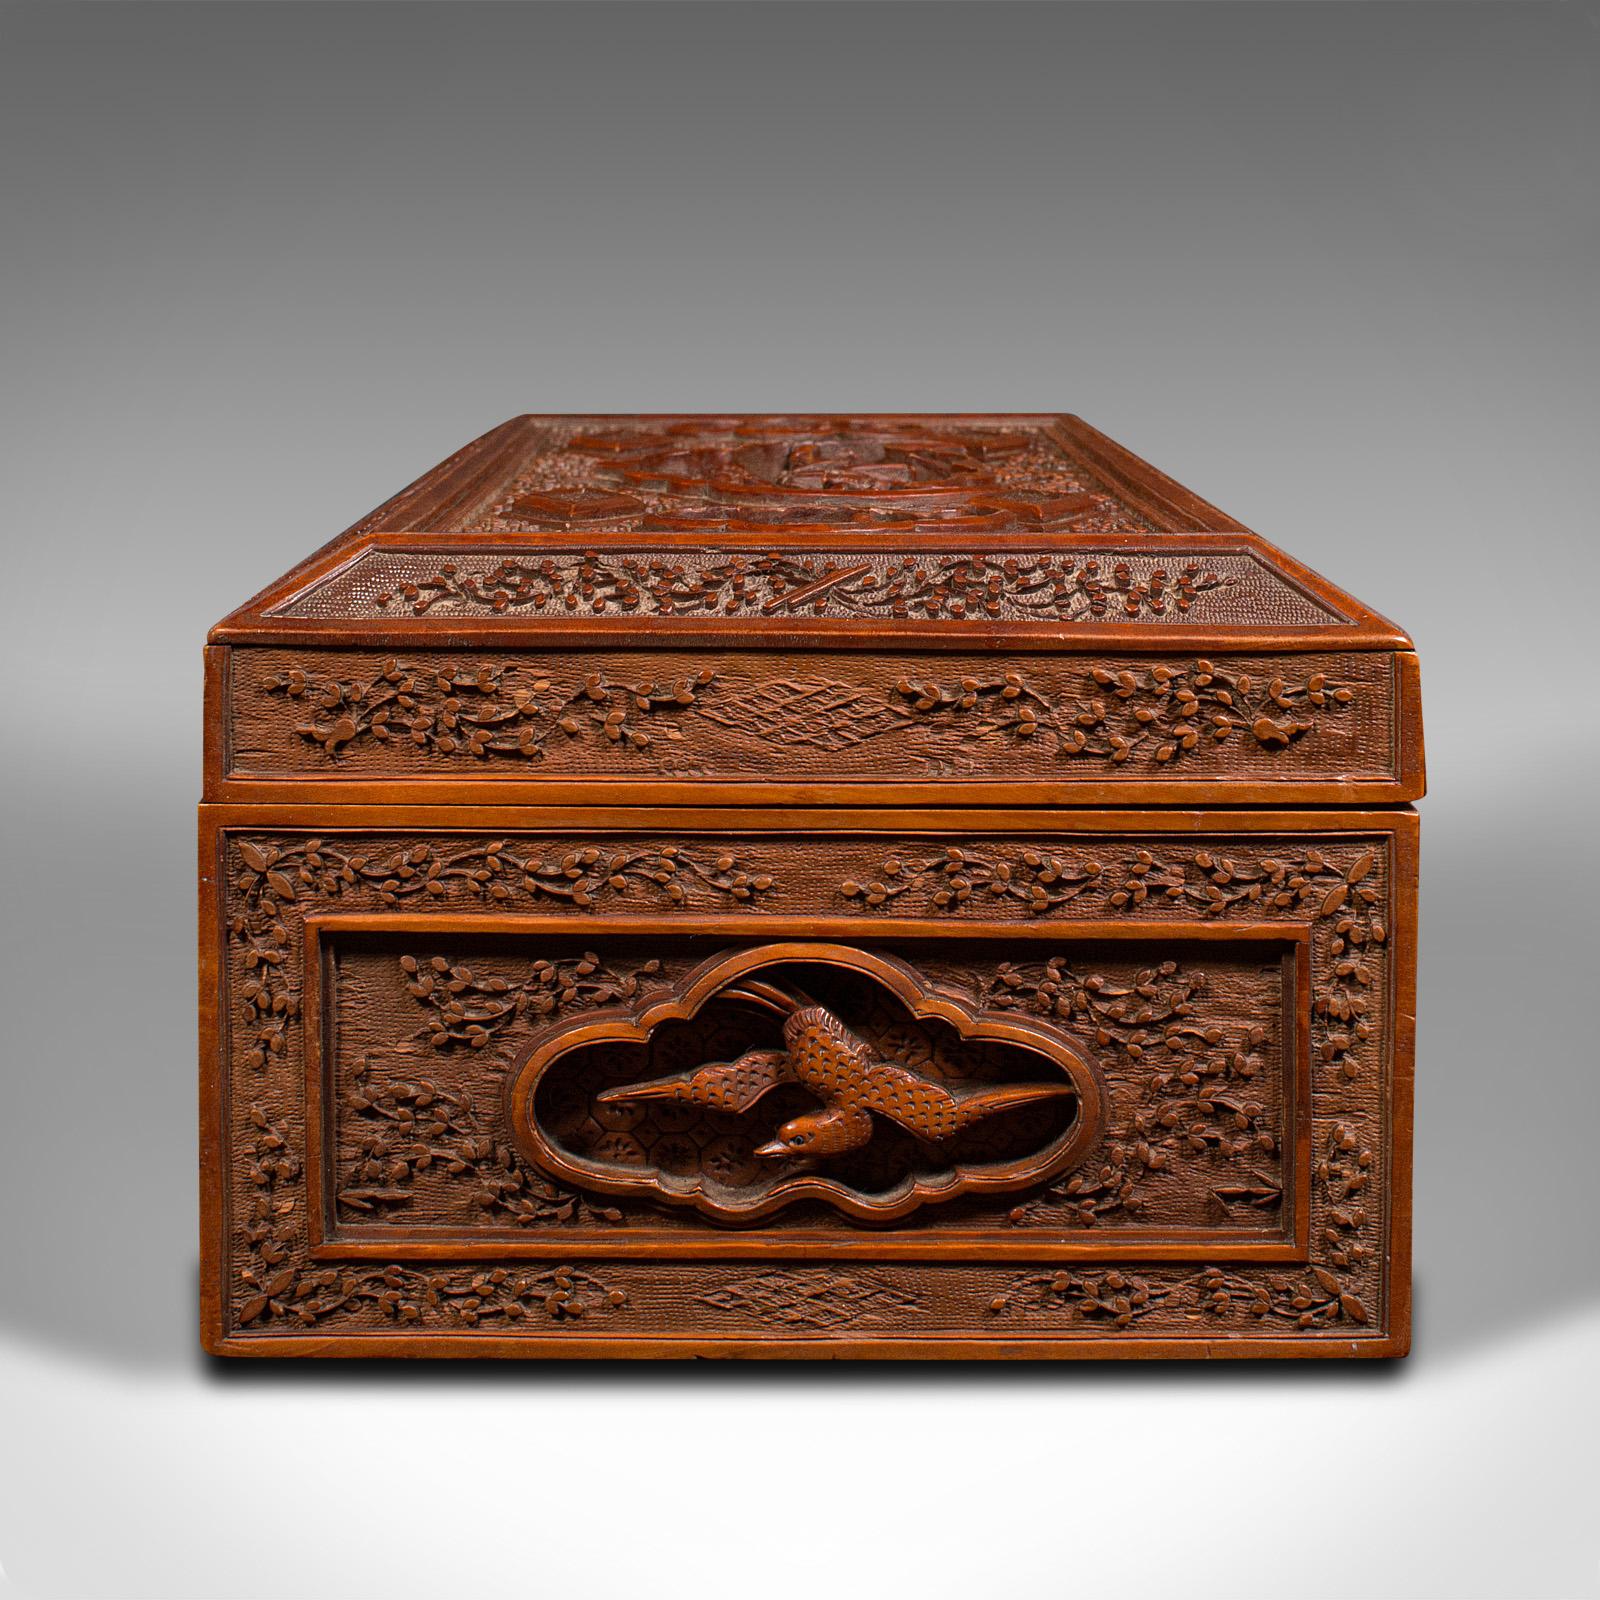 Mid-20th Century Vintage Carved Keepsake Case, Chinese, Satinwood, Decorative Box, Circa 1950 For Sale